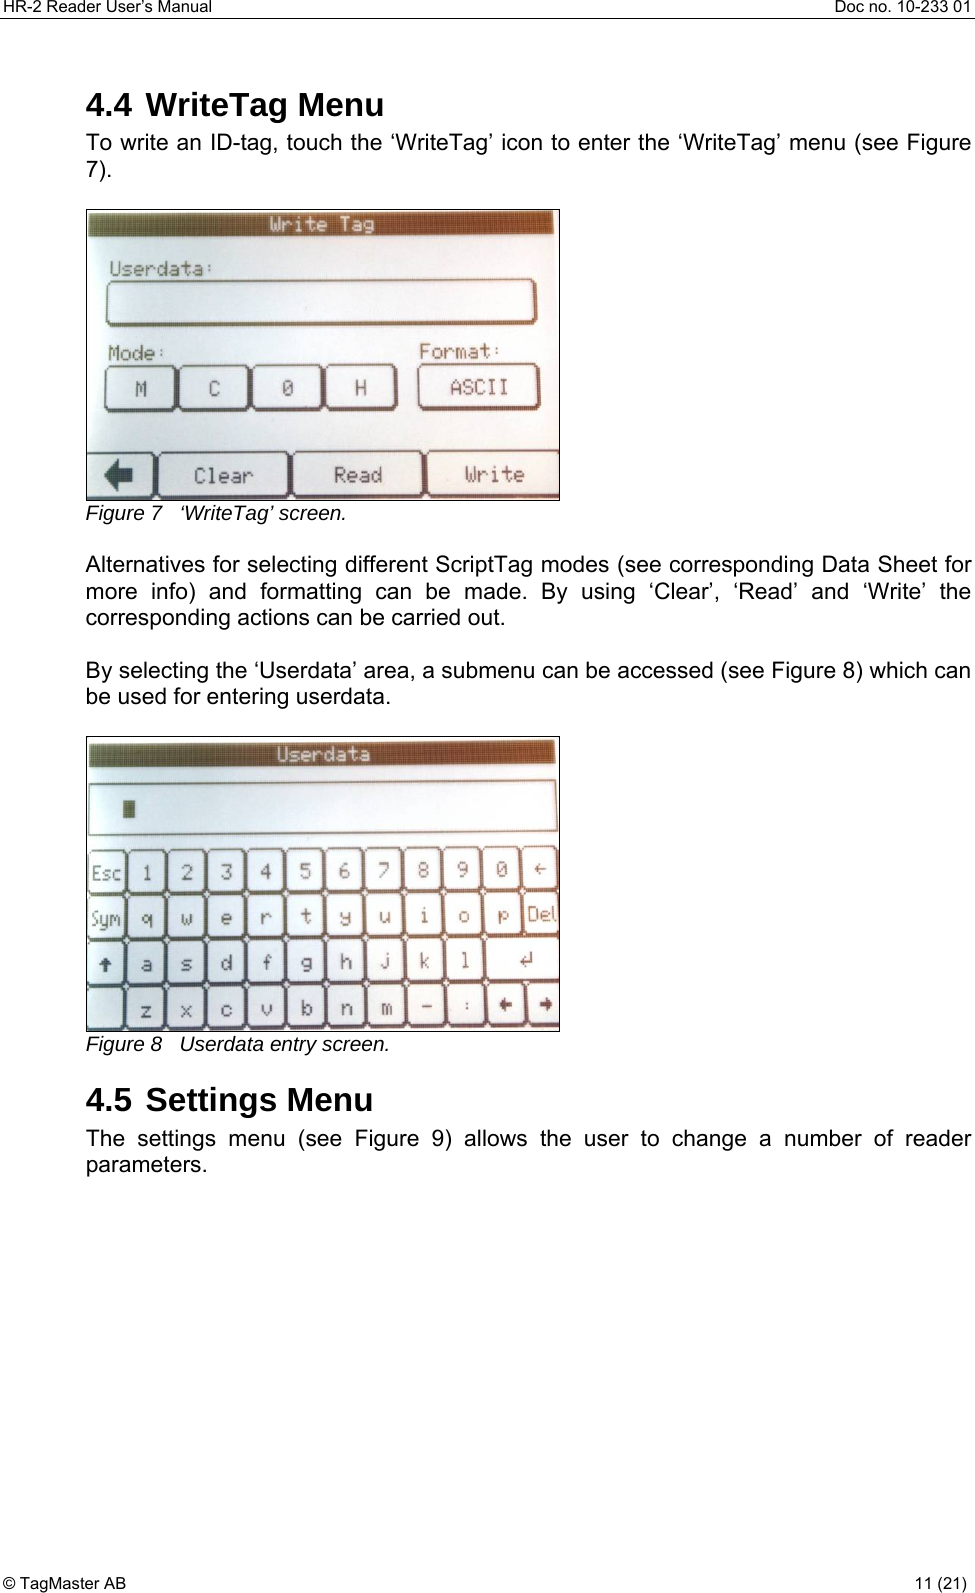 HR-2 Reader User’s Manual  Doc no. 10-233 01 © TagMaster AB  11 (21)   4.4 WriteTag Menu To write an ID-tag, touch the ‘WriteTag’ icon to enter the ‘WriteTag’ menu (see Figure 7).   Figure 7   ‘WriteTag’ screen.  Alternatives for selecting different ScriptTag modes (see corresponding Data Sheet for more info) and formatting can be made. By using ‘Clear’, ‘Read’ and ‘Write’ the corresponding actions can be carried out.  By selecting the ‘Userdata’ area, a submenu can be accessed (see Figure 8) which can be used for entering userdata.   Figure 8   Userdata entry screen. 4.5 Settings Menu The settings menu (see Figure 9) allows the user to change a number of reader parameters. 